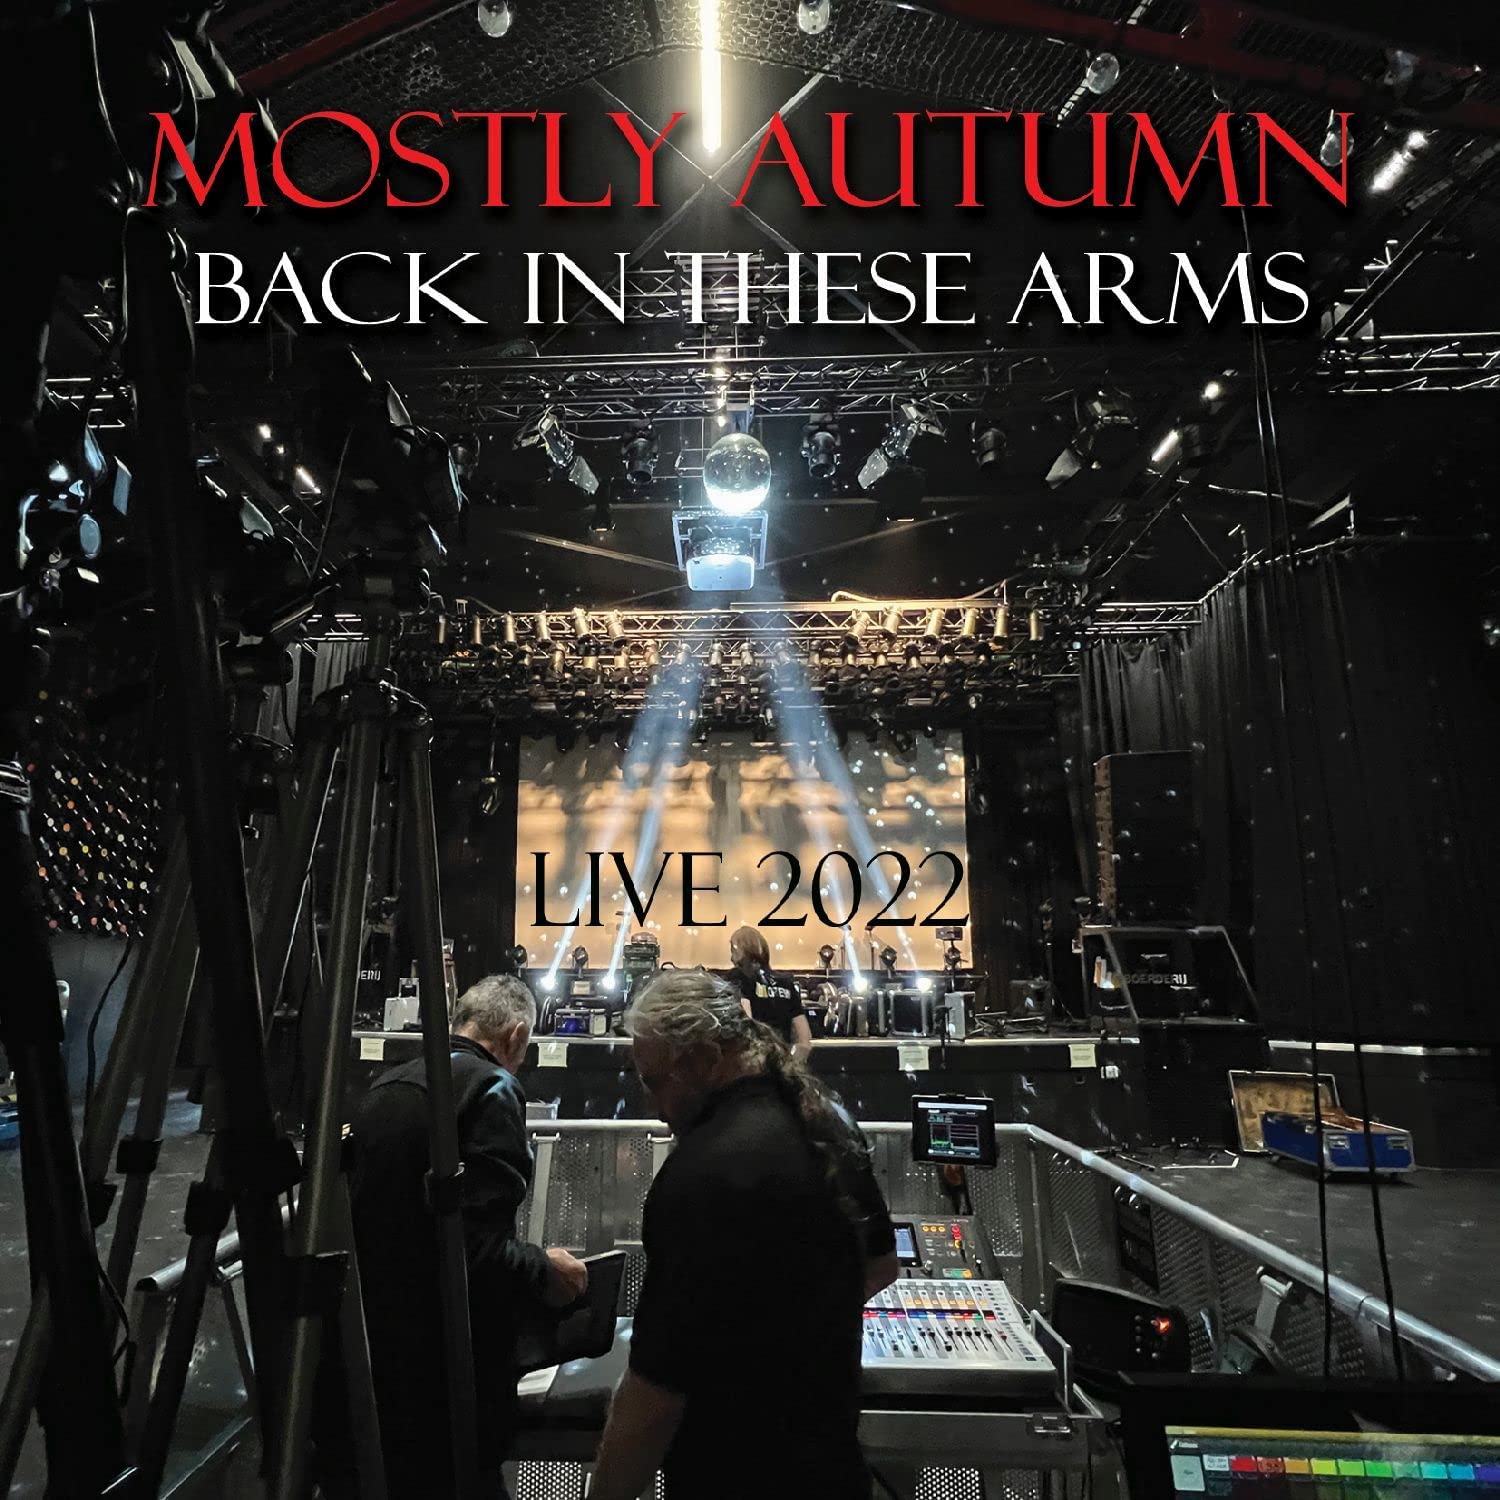 Mostly Autumn - Back In These Arms - Live 2022